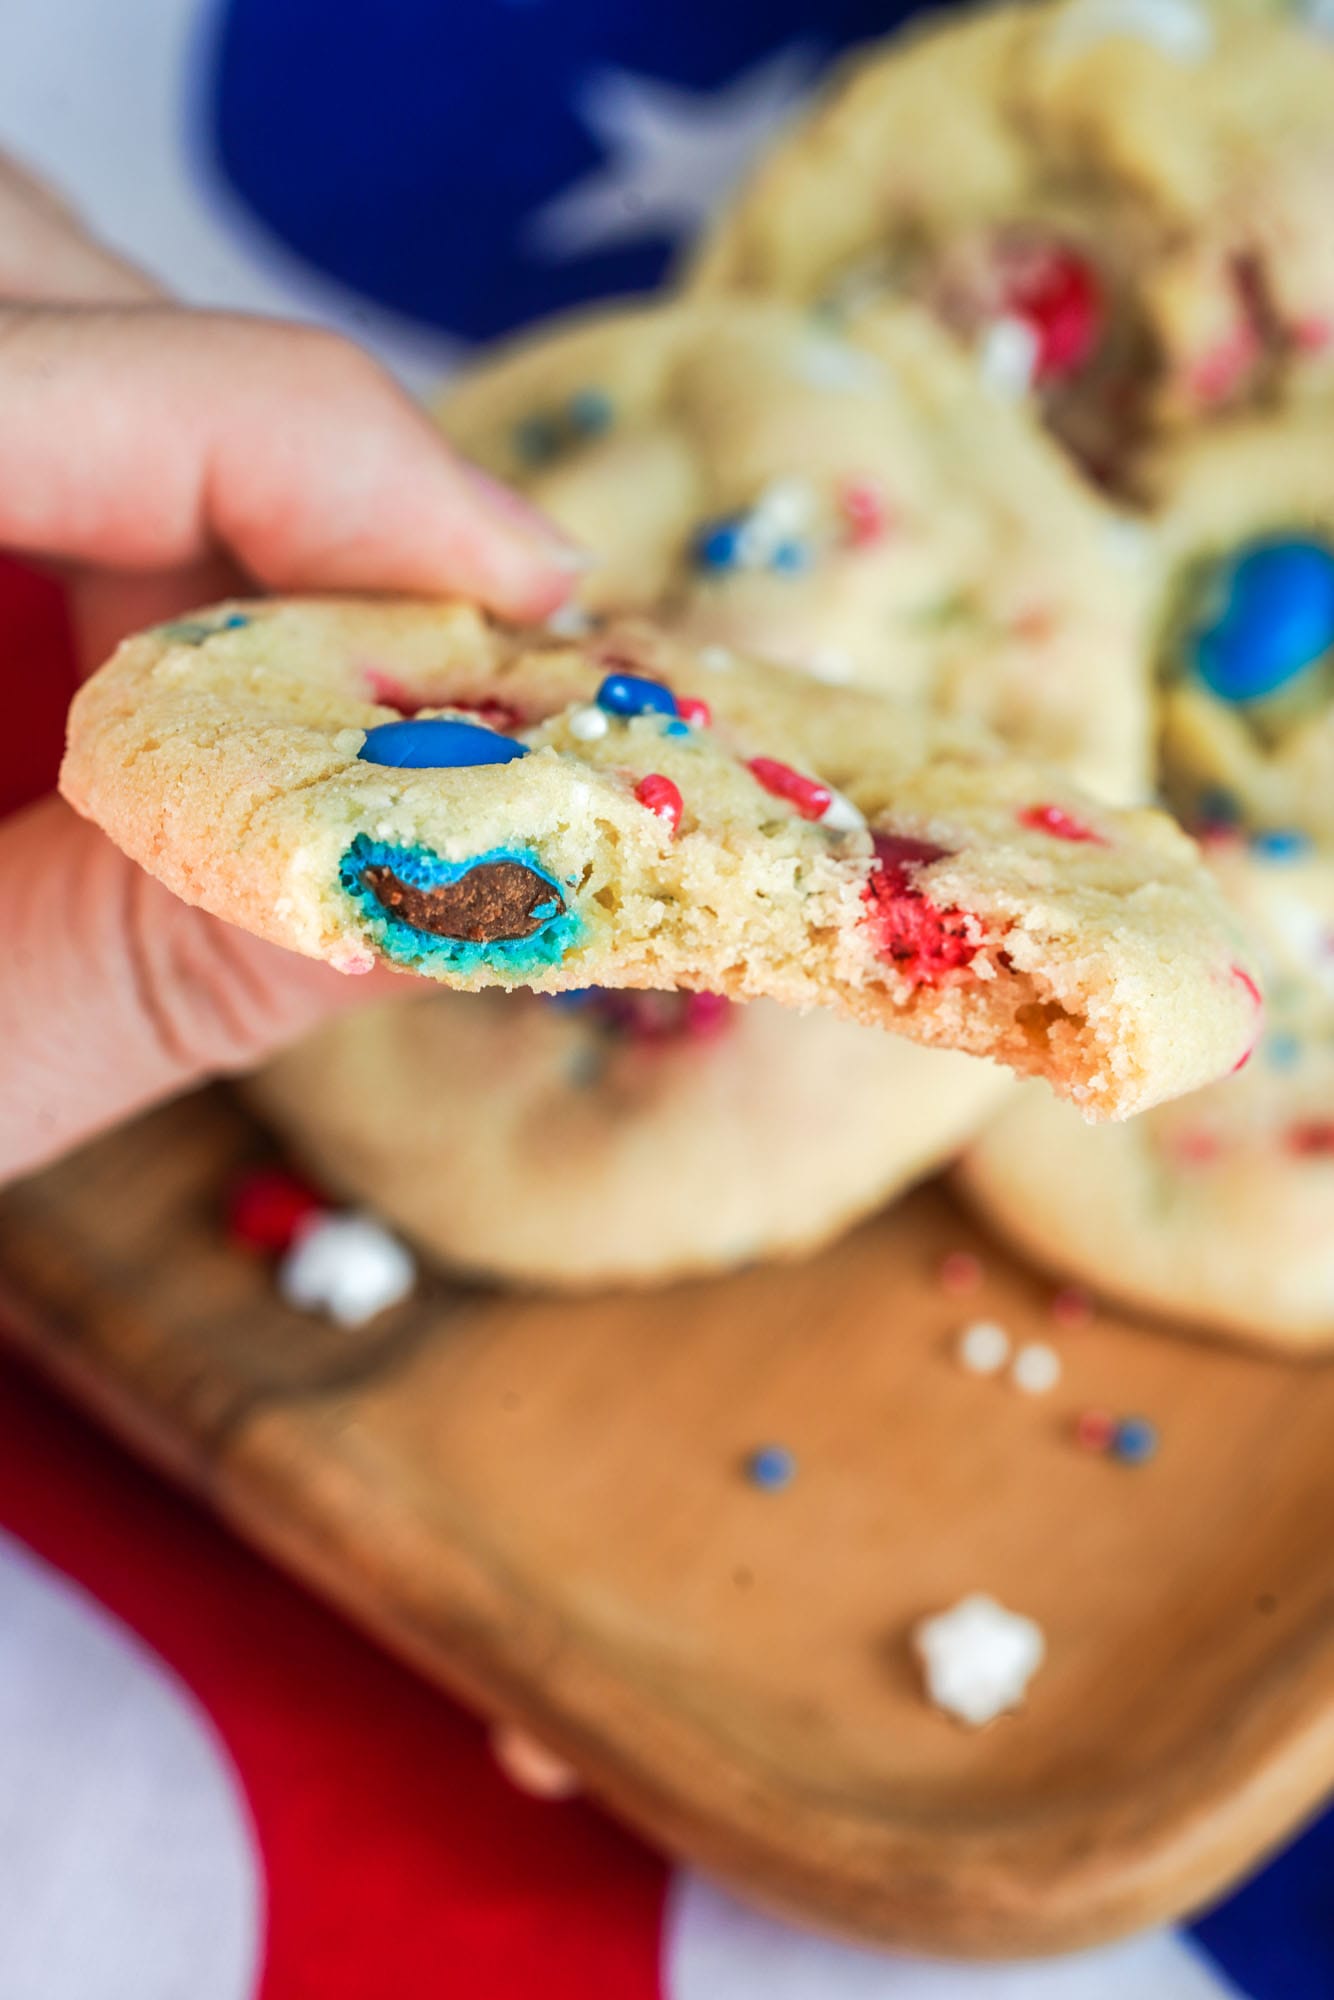 A bite shot of M&M patriotic cookie, holding it with a hand.